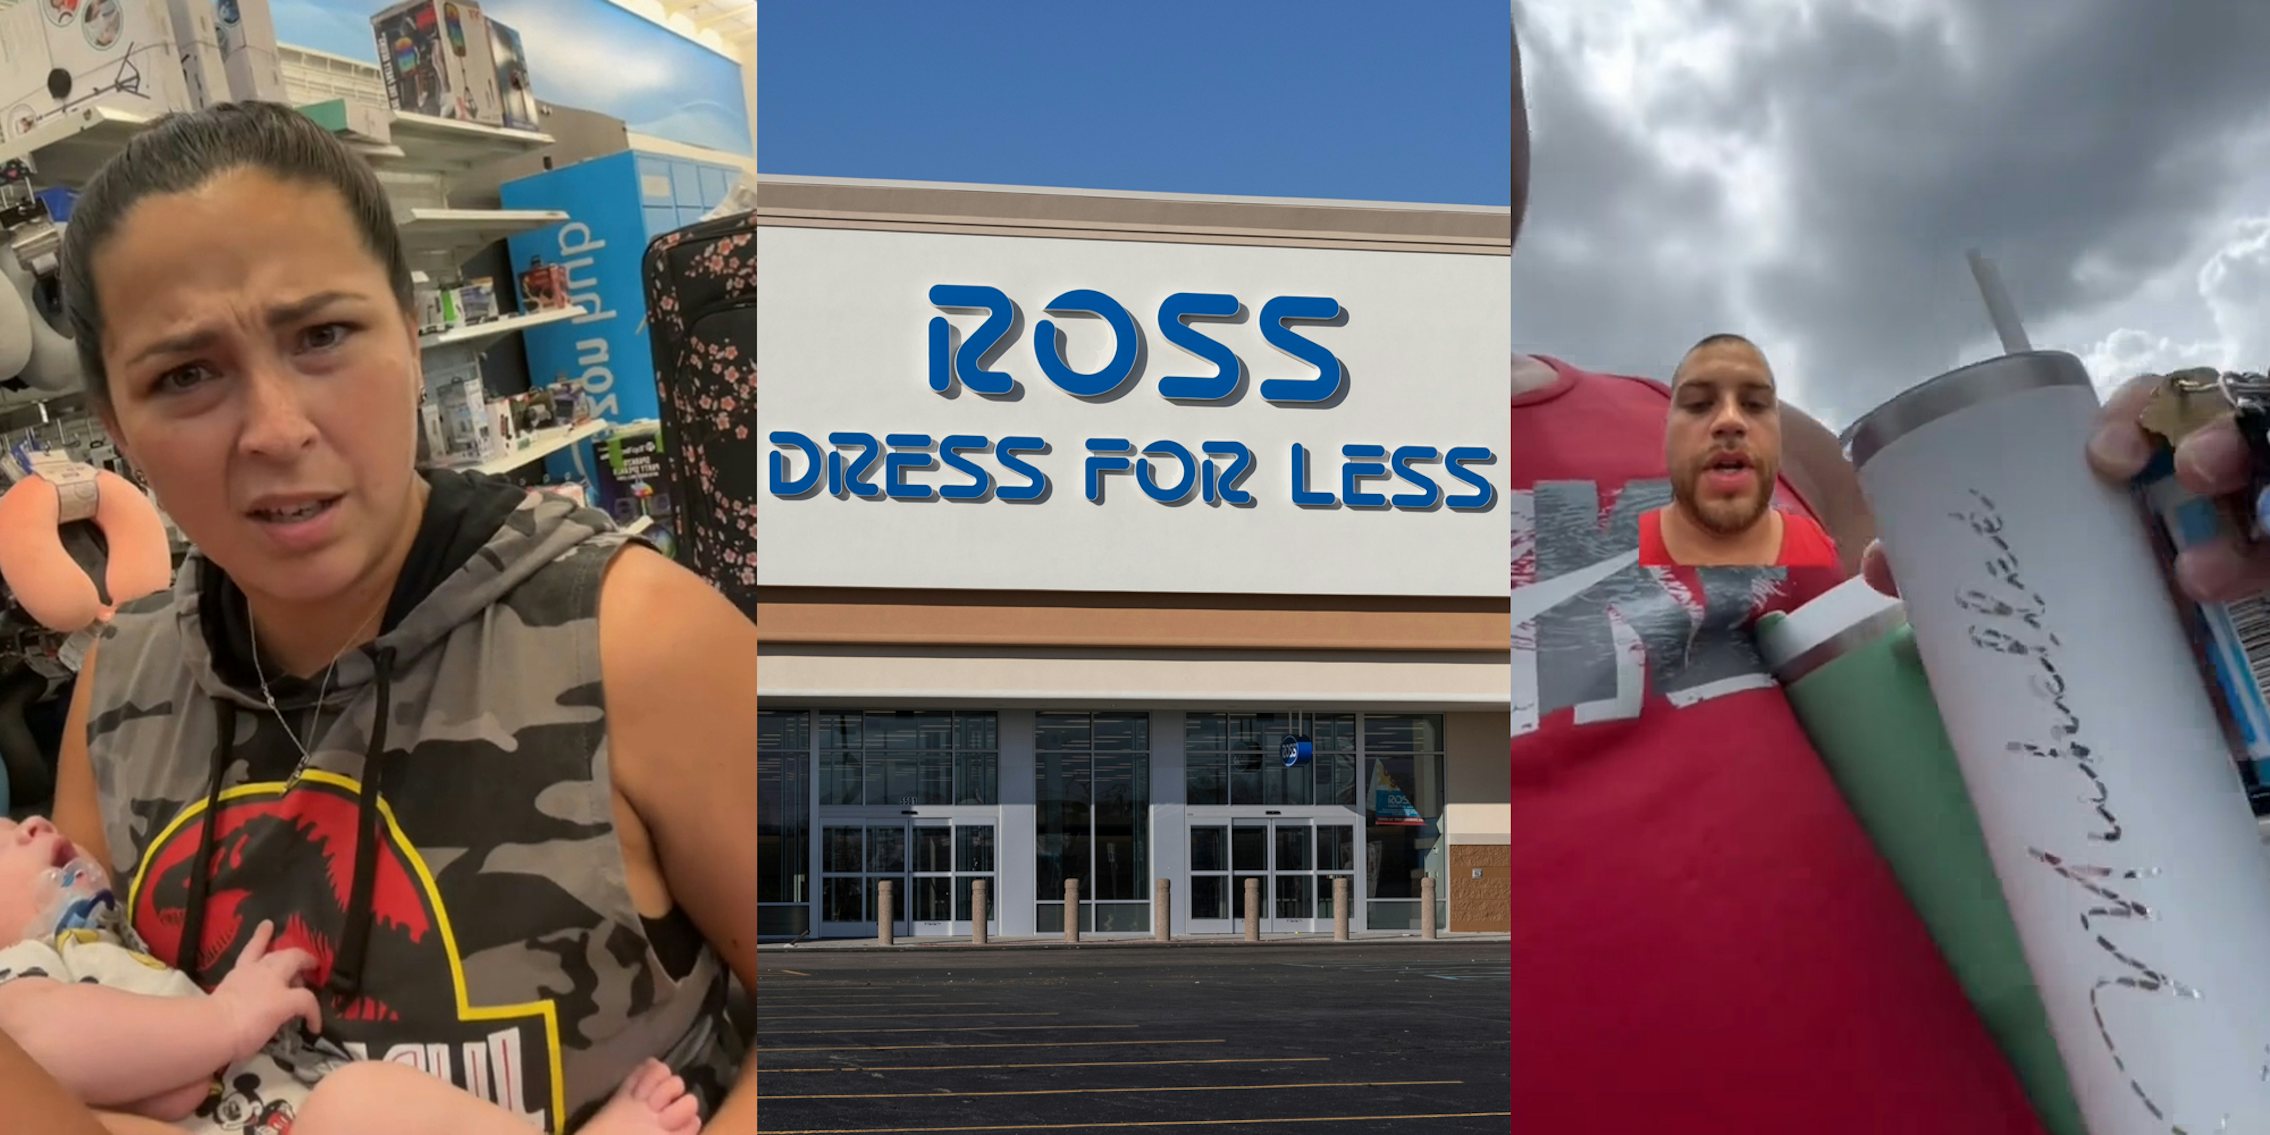 Ross customer holding baby (l) Ross Dress For Less building with sign (c) Ross customer greenscreen TikTok over video of him walking into store with cups (r)